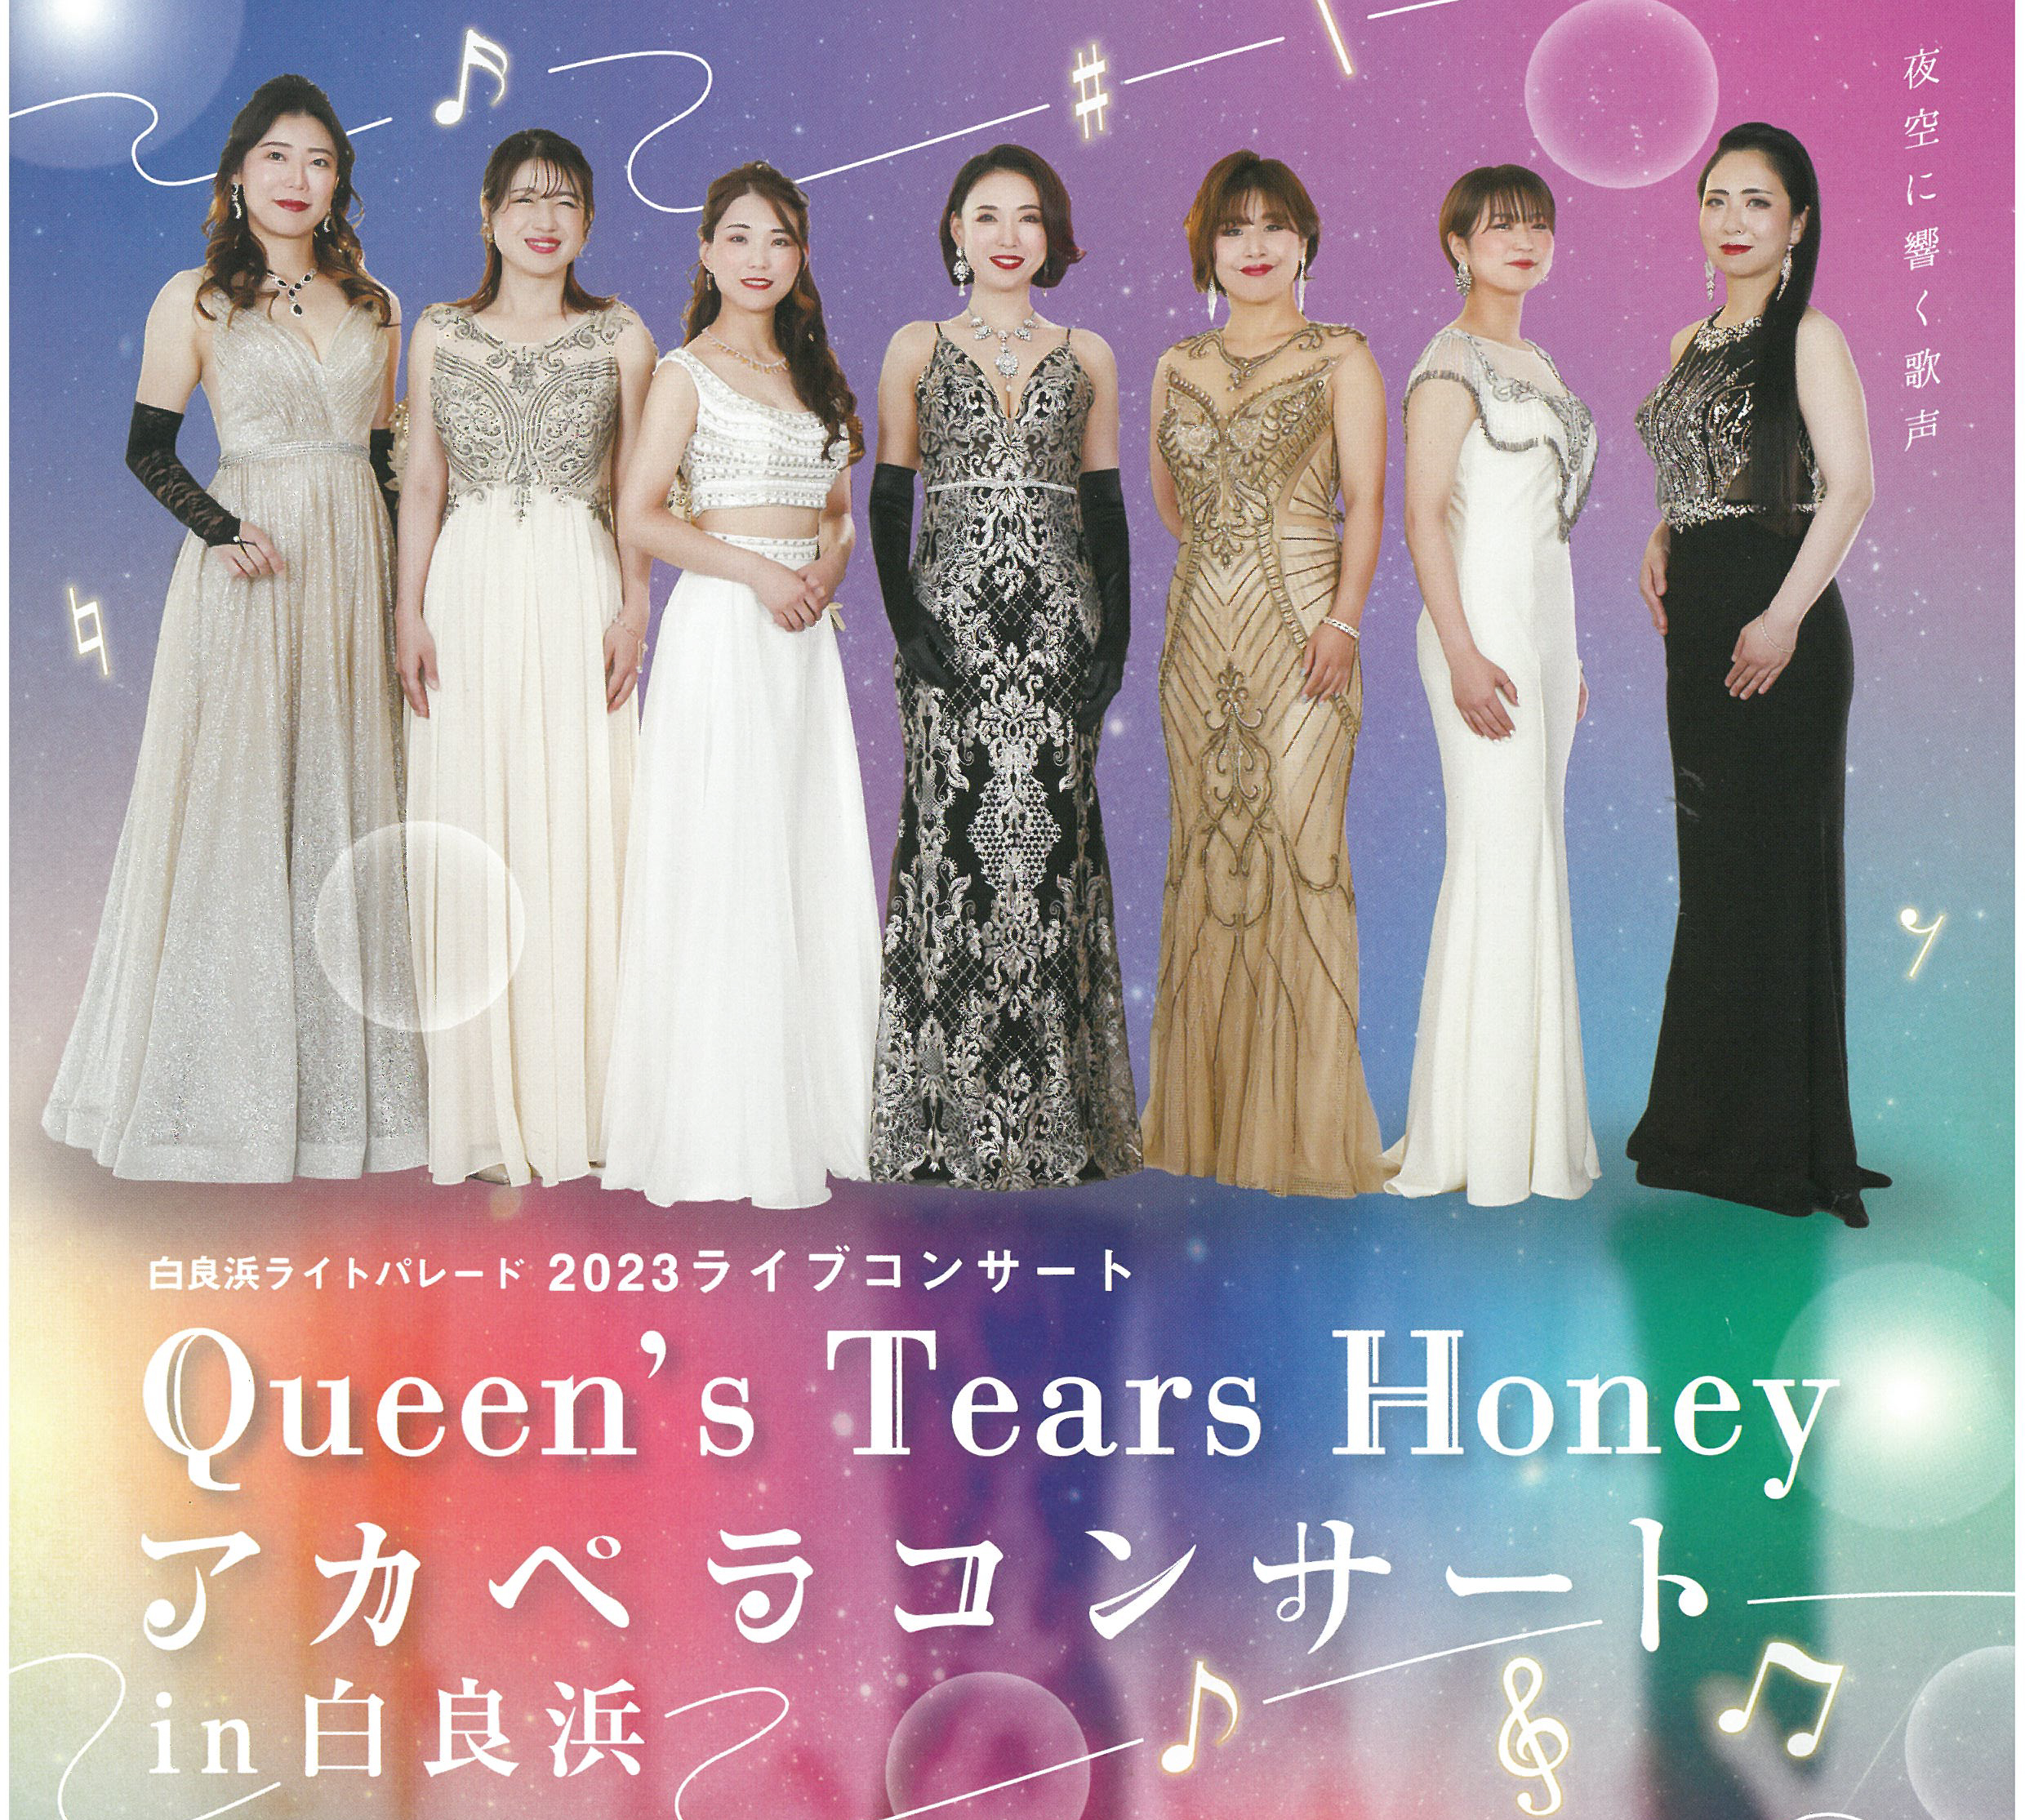 Queen's Tears Honey アカペラコンサートin 白良浜2023